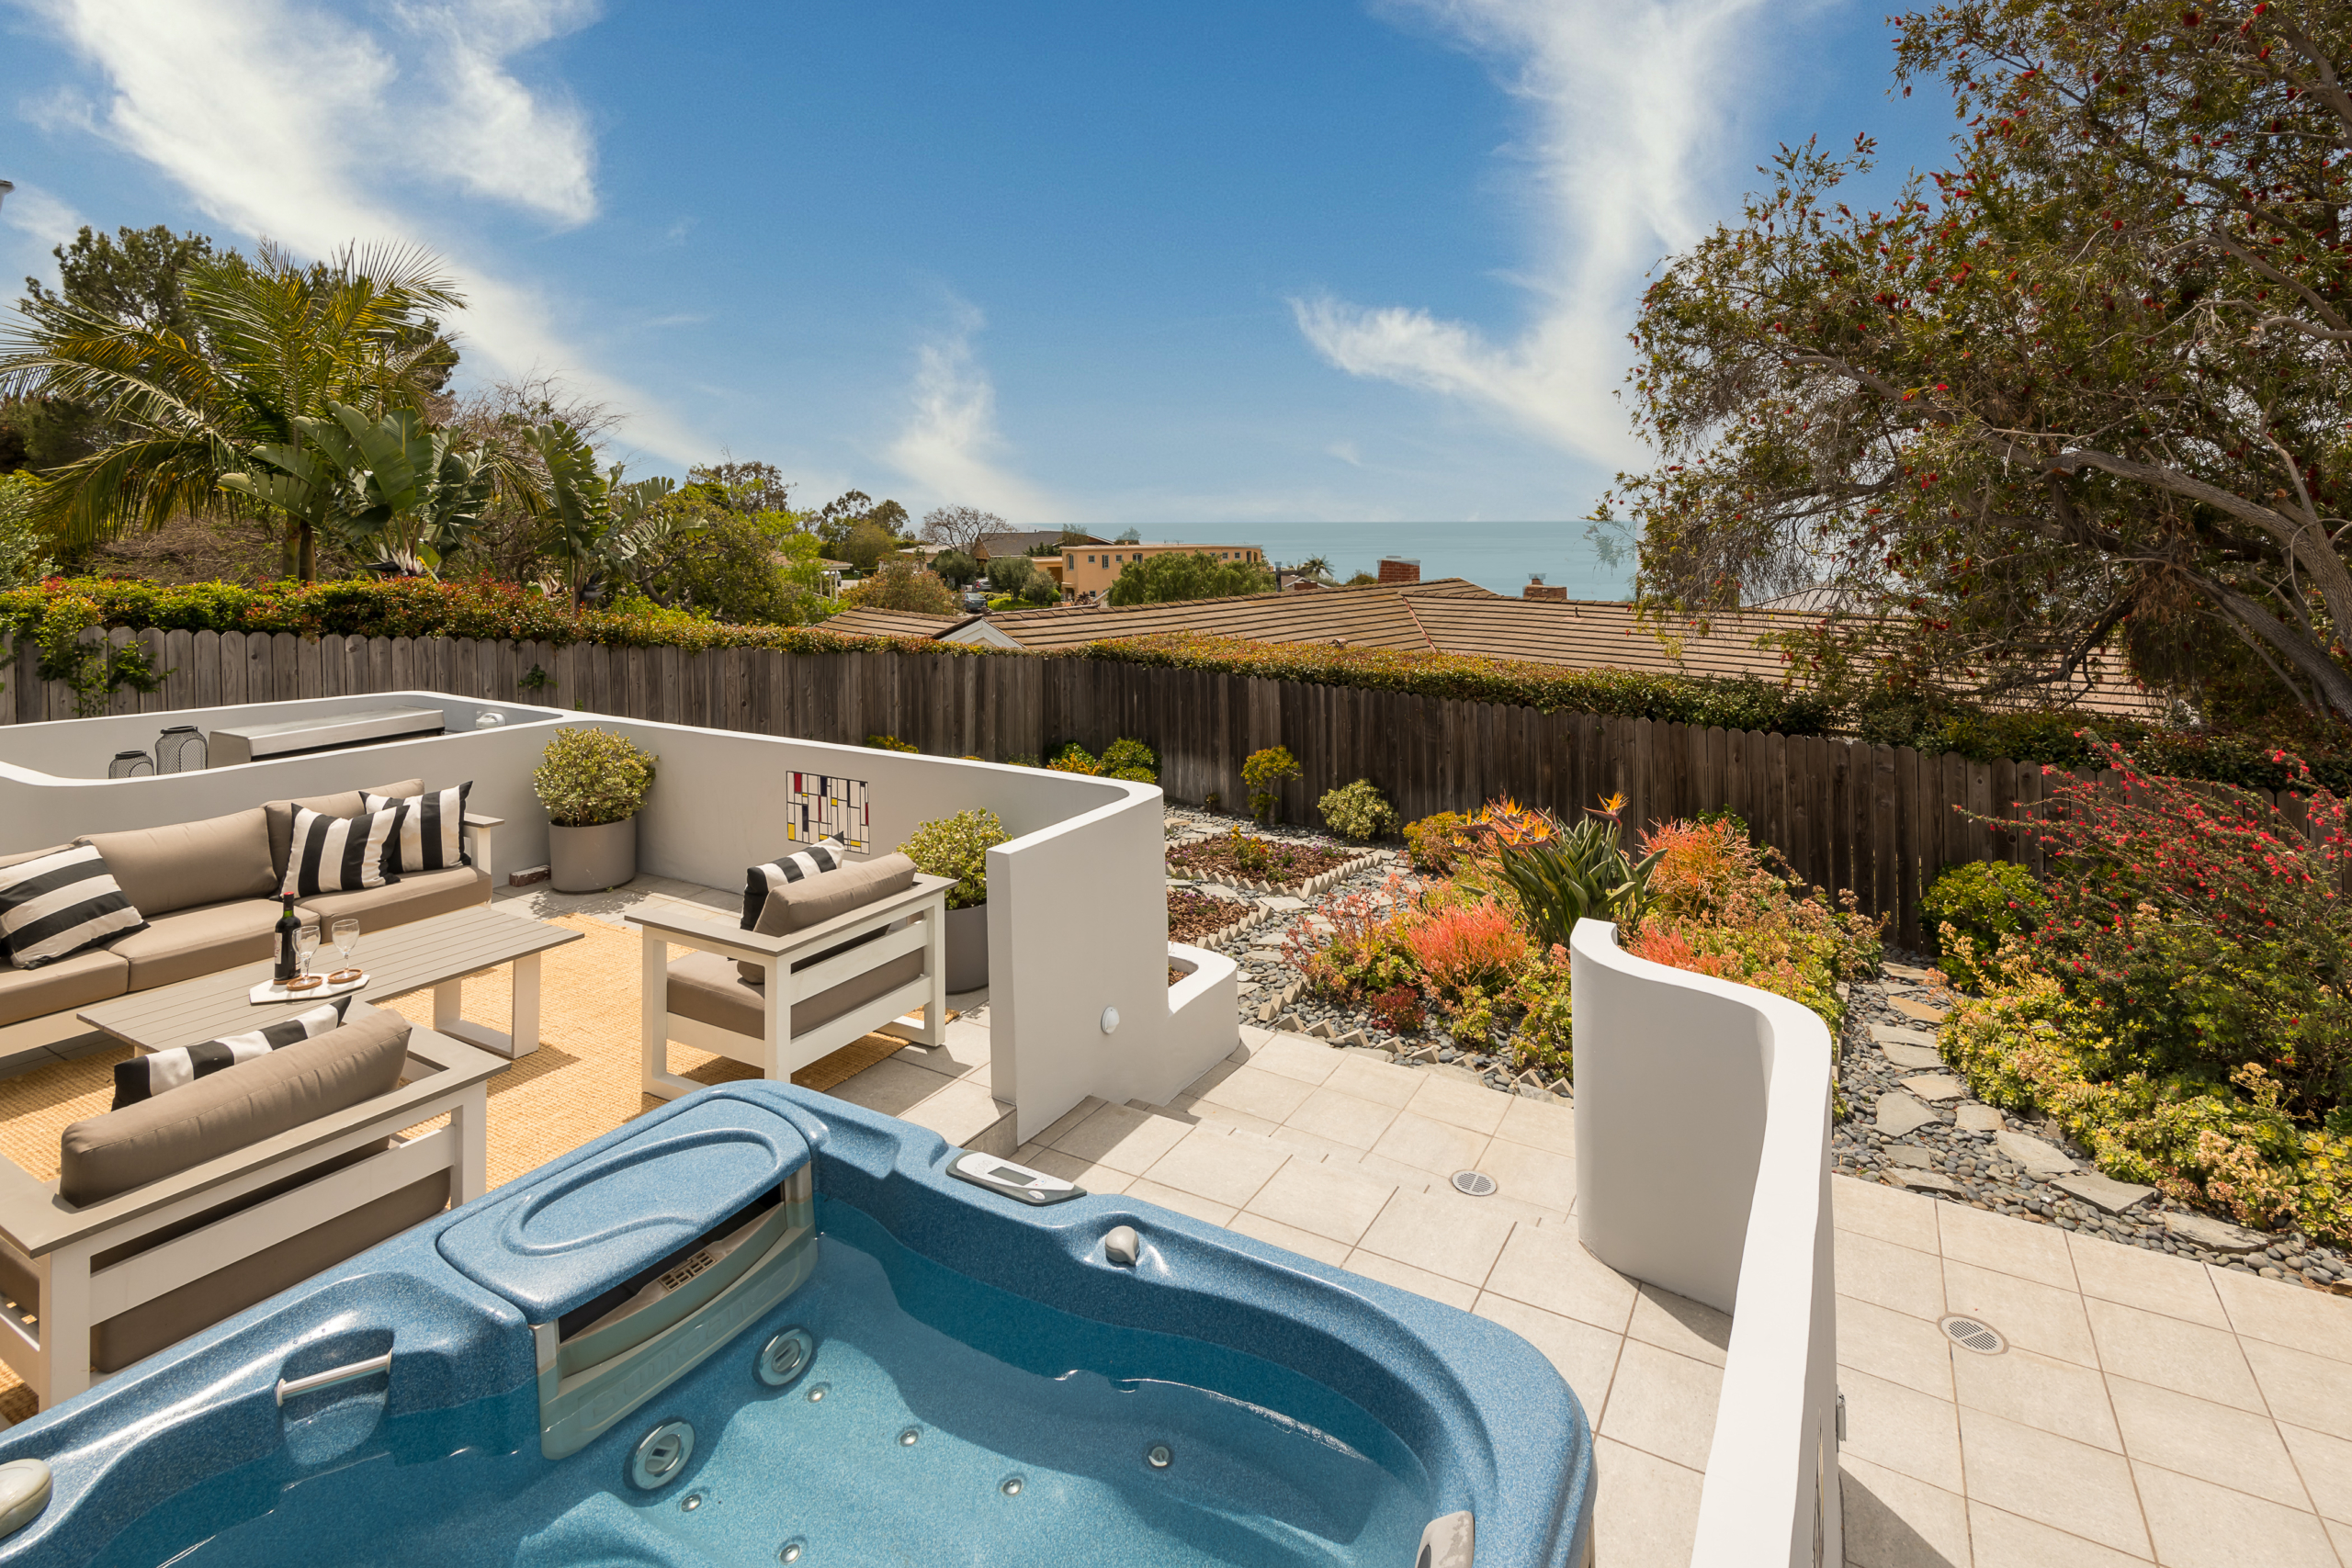 Patio entertaining area, hot tub and garden with view of ocean